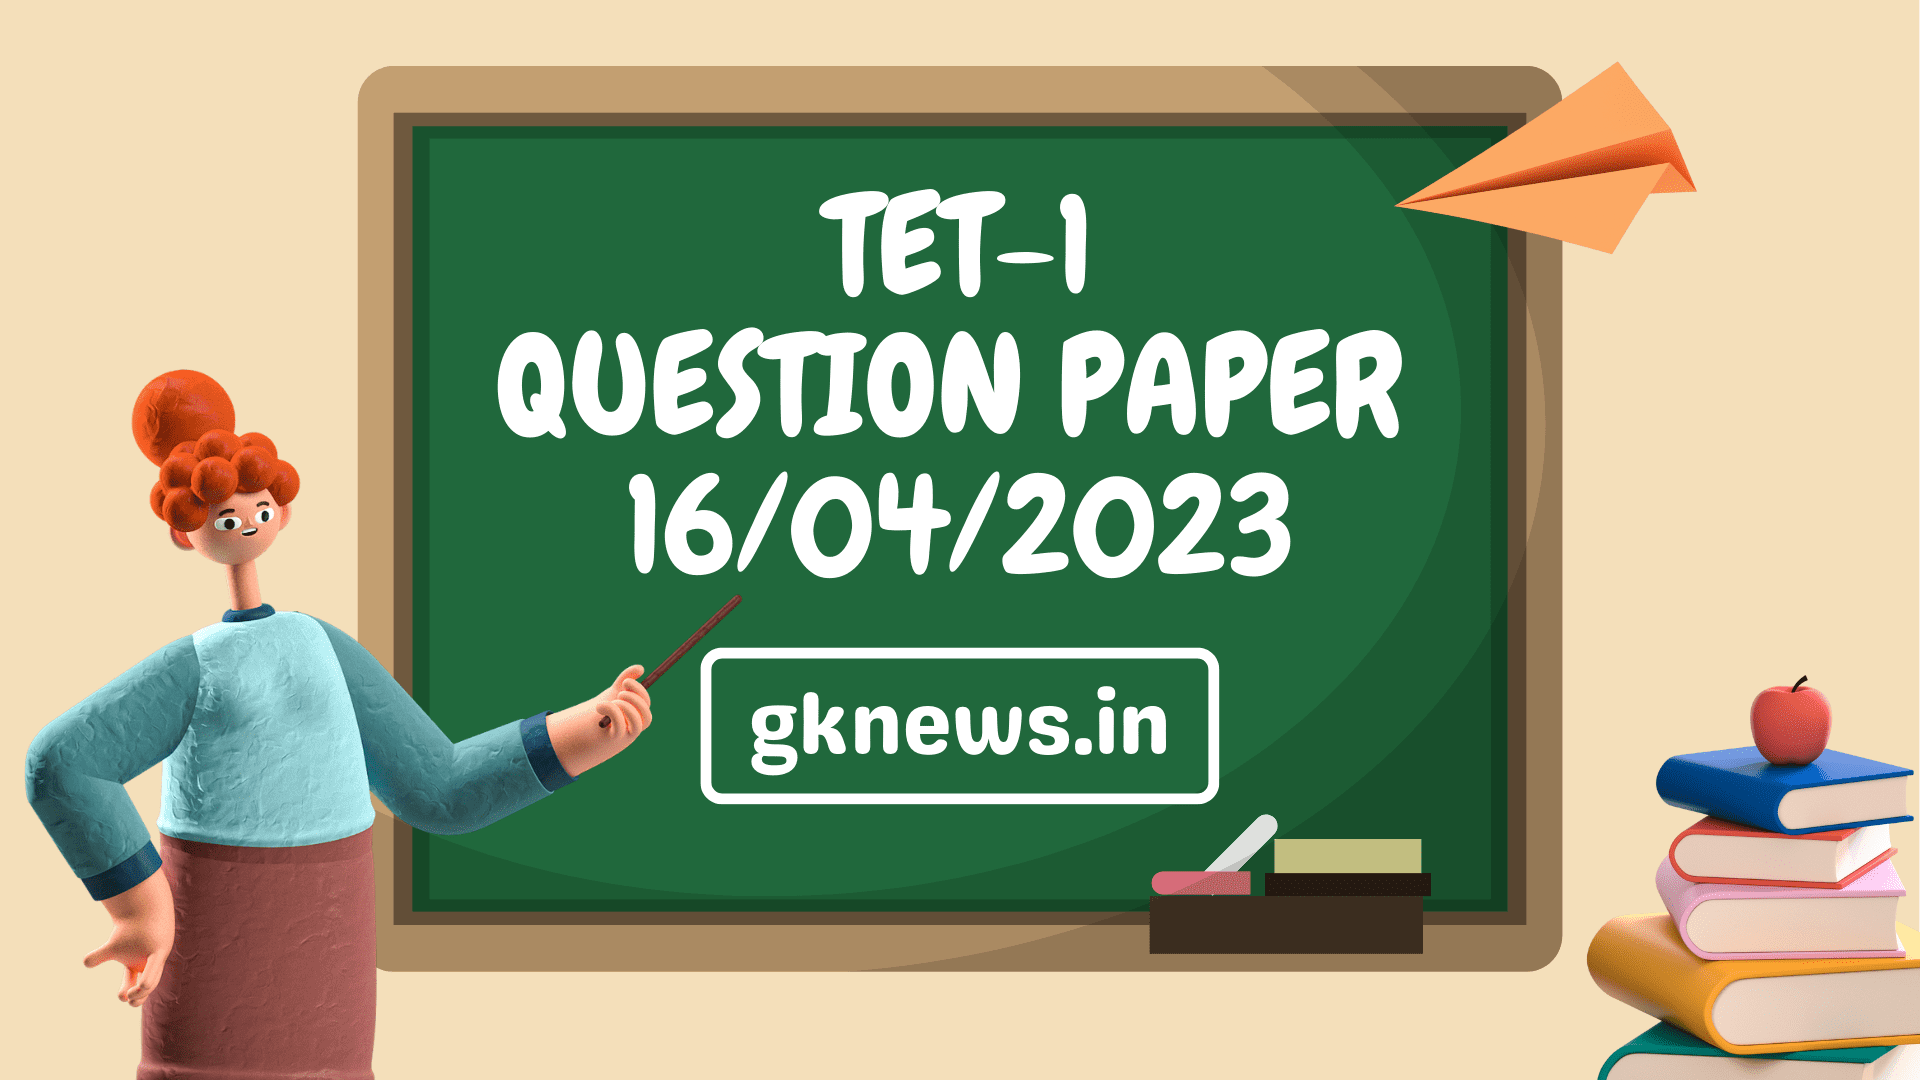 GSEB TET-1 Question Paper 2023